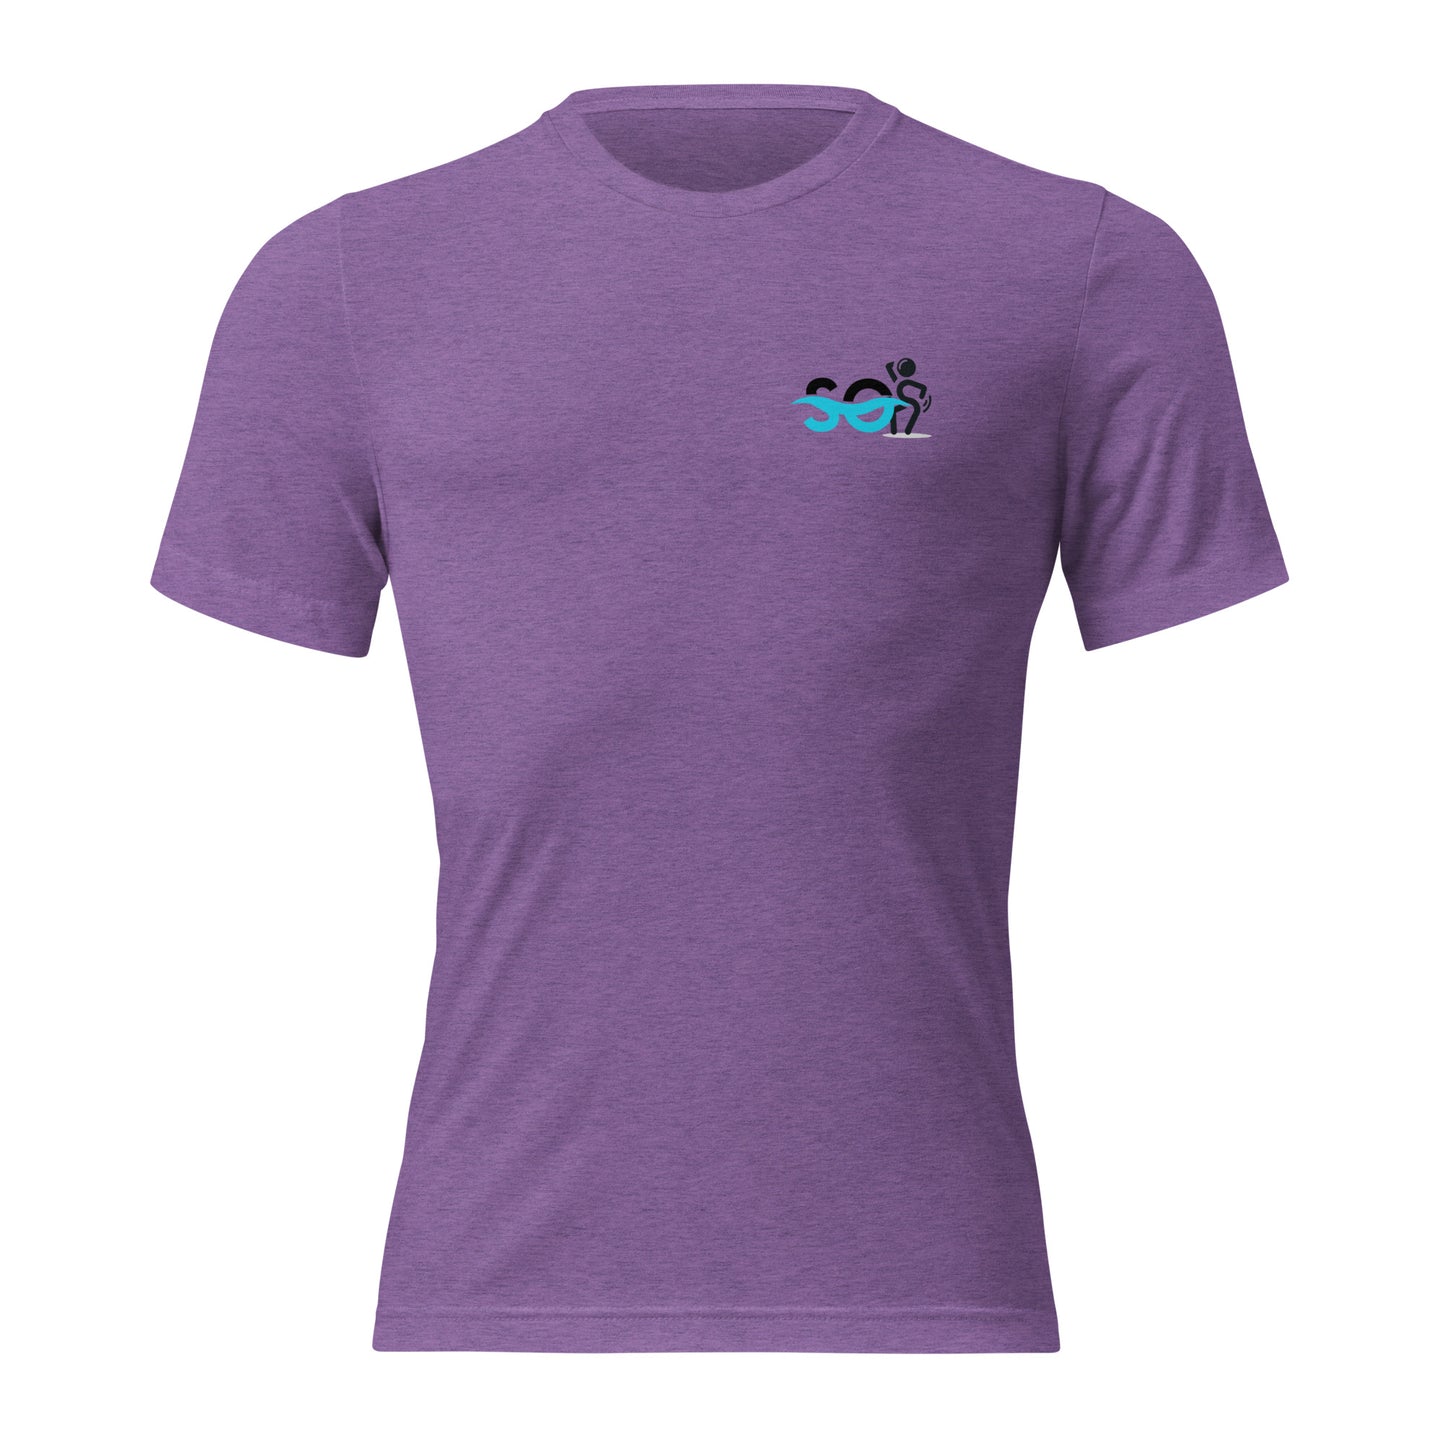 a purple t - shirt with a blue logo on the chest